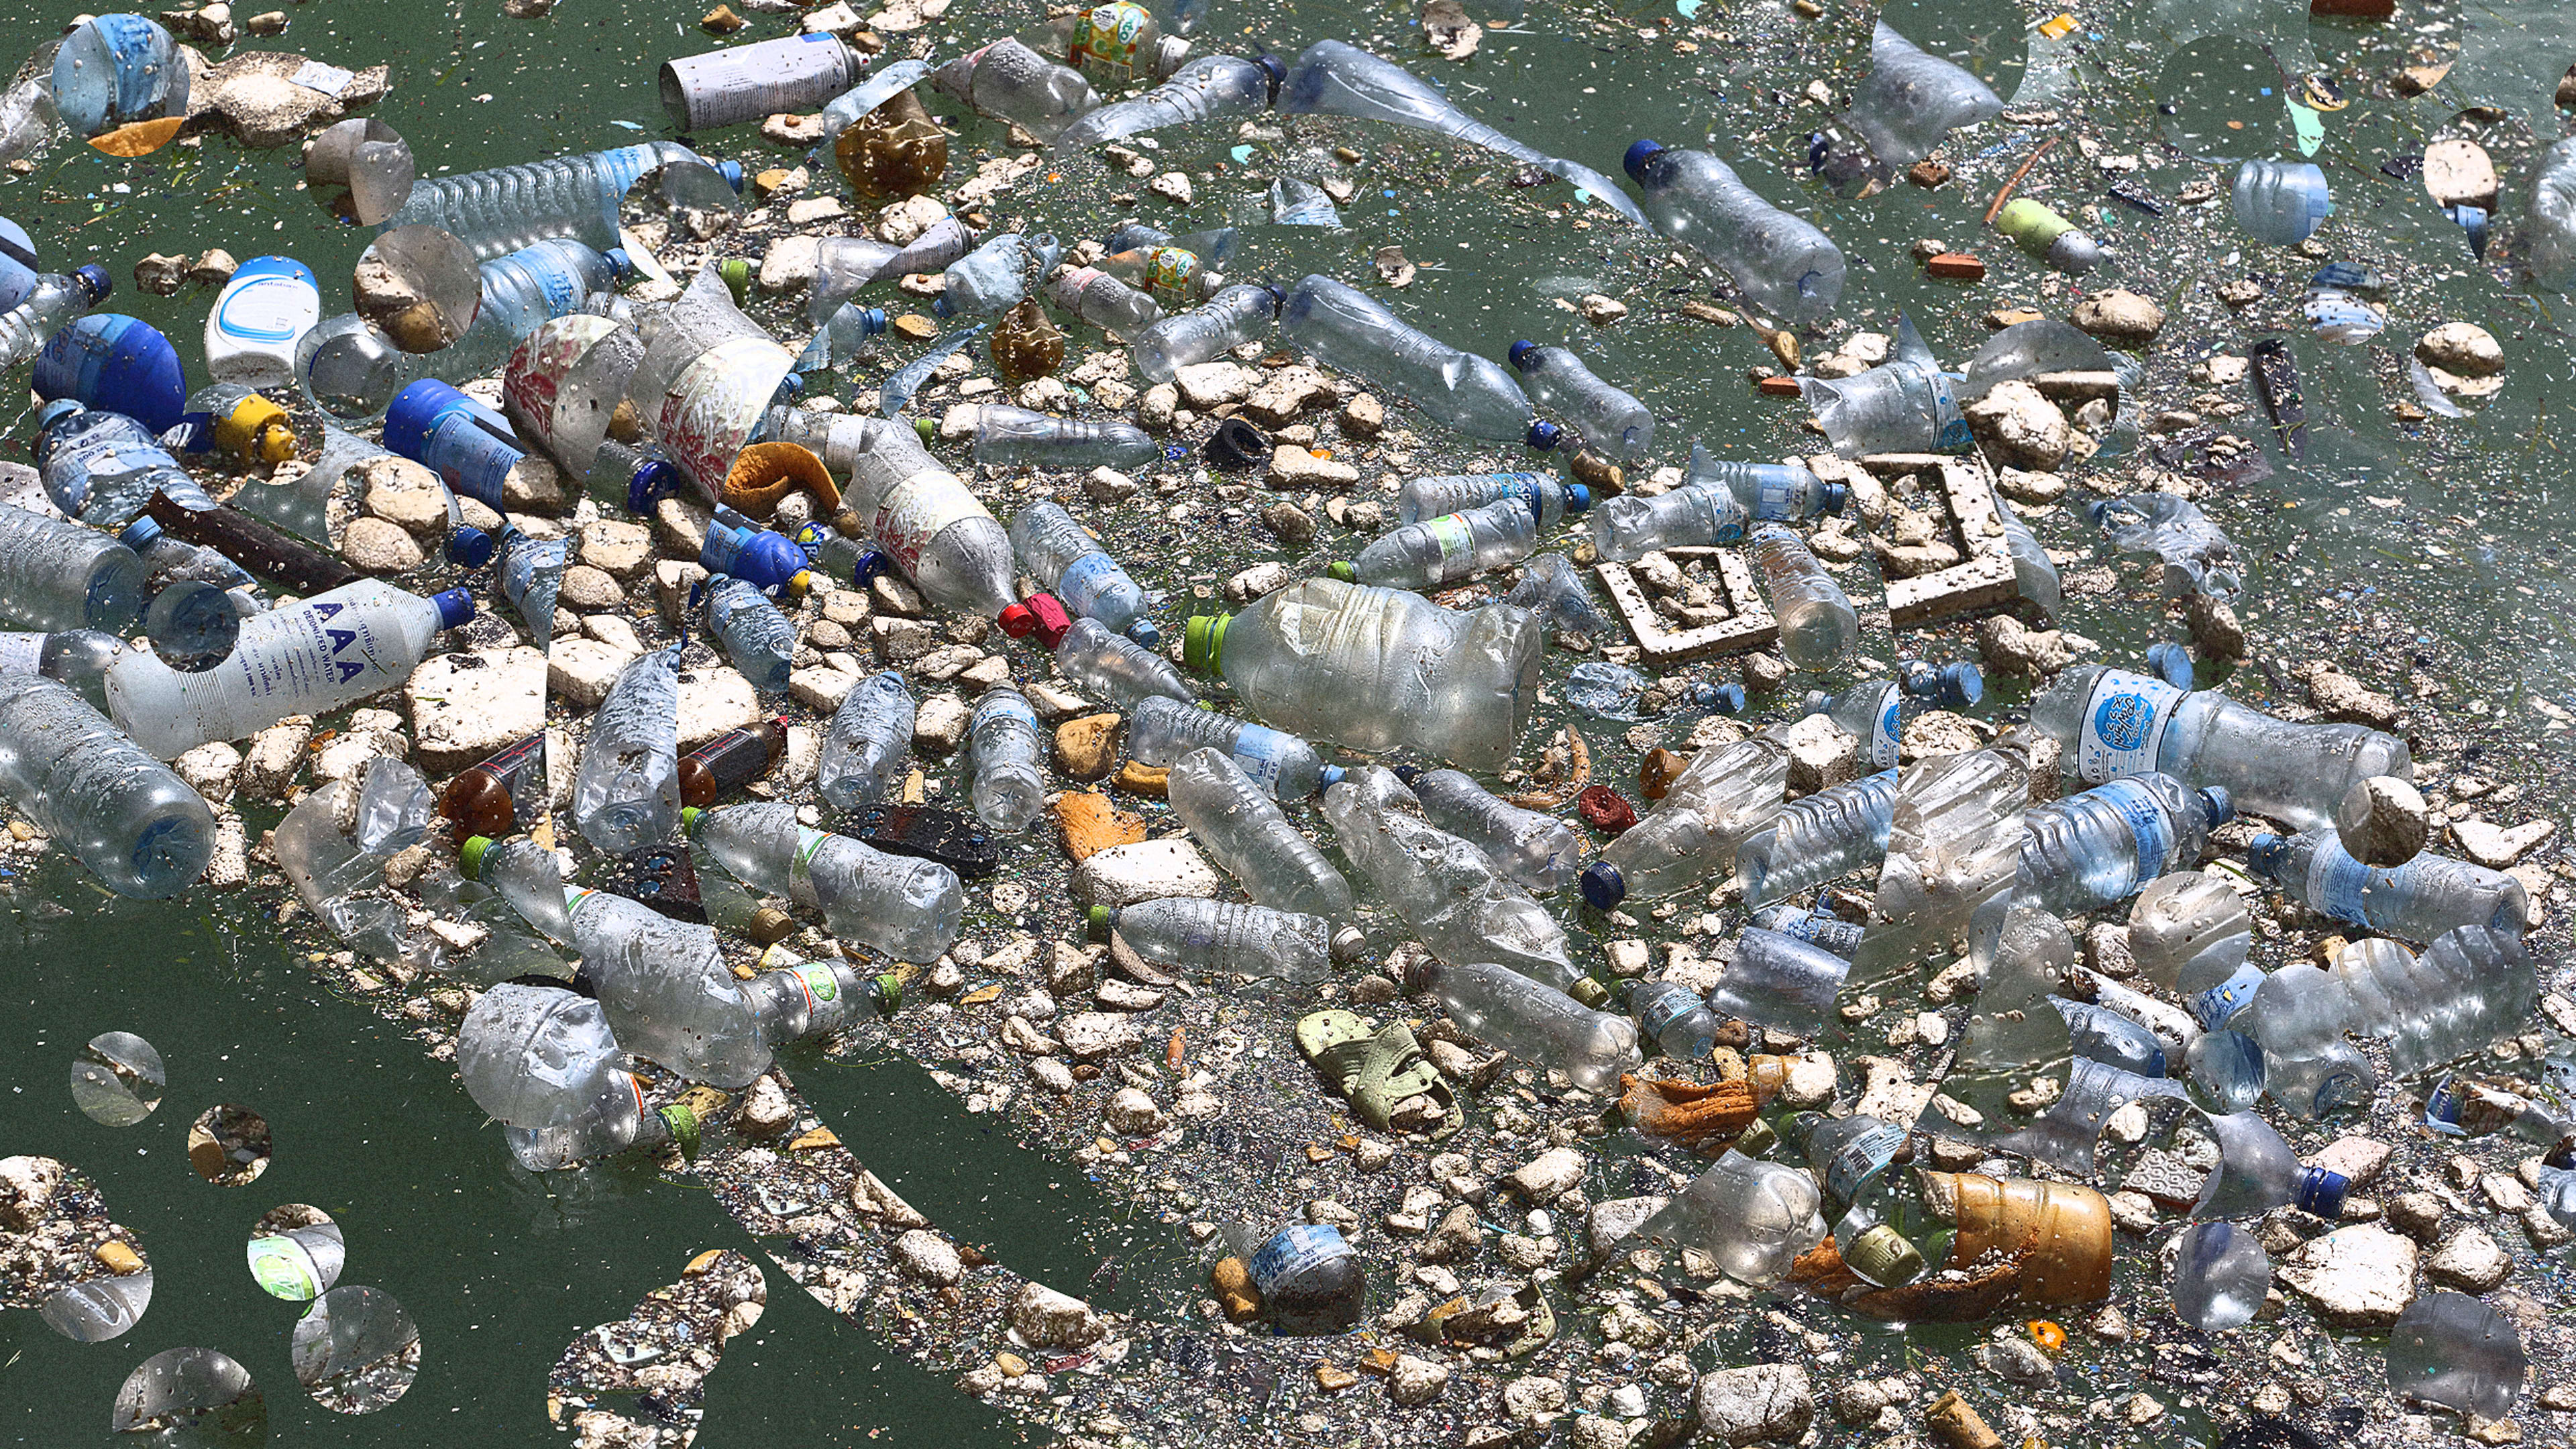 There are more than 170 trillion pieces of plastic in the ocean